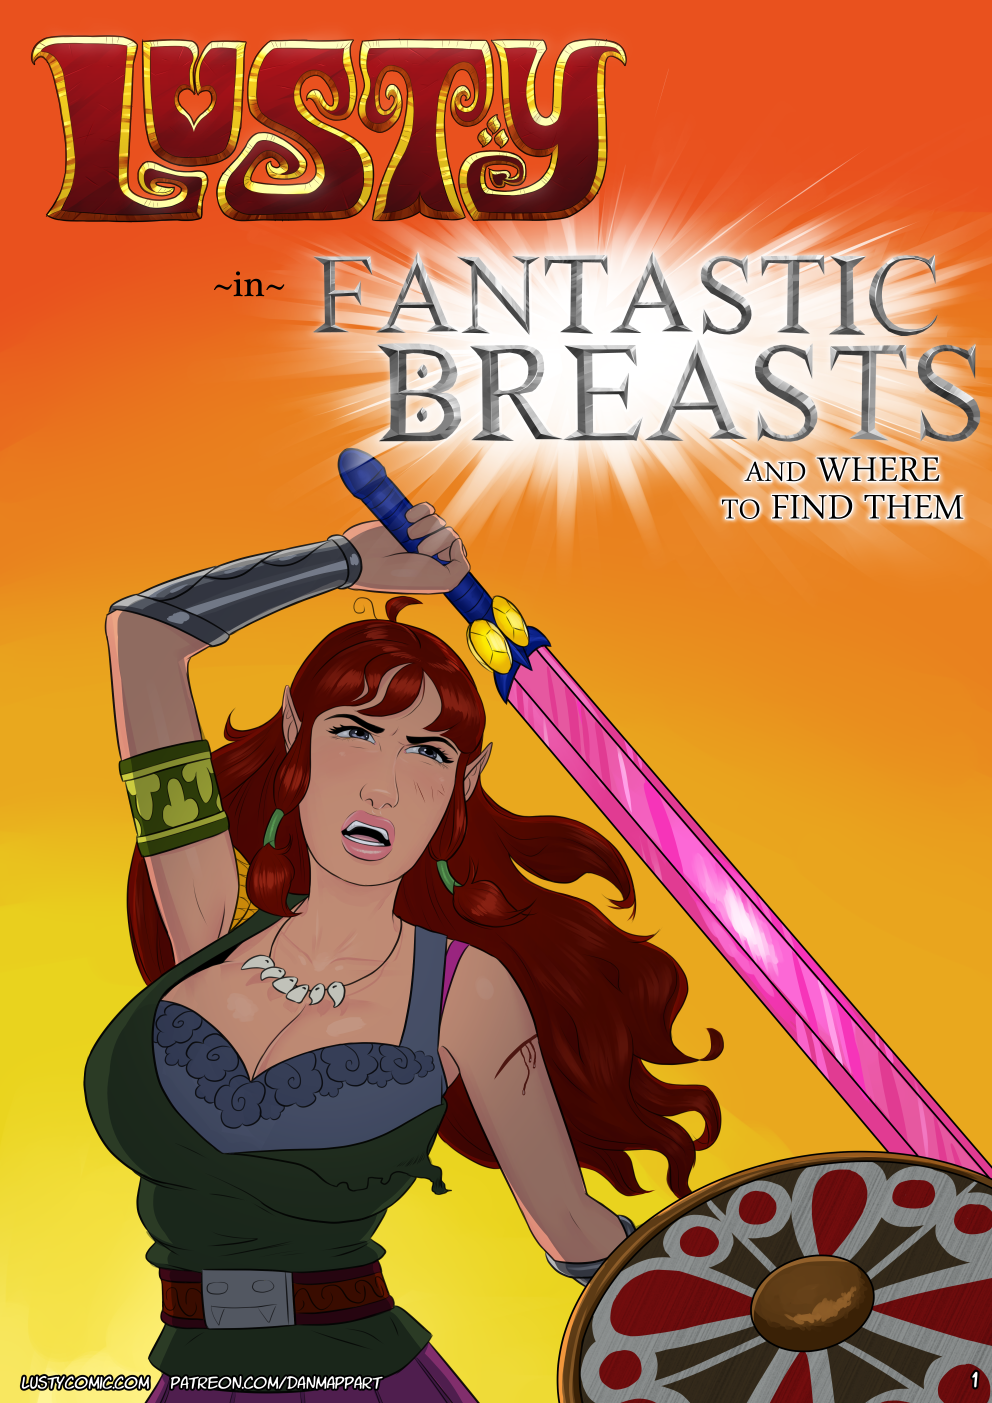 danmappart_529967_Lusty_Fantastic_Breasts_and_Where_to_Find_Them_1.png